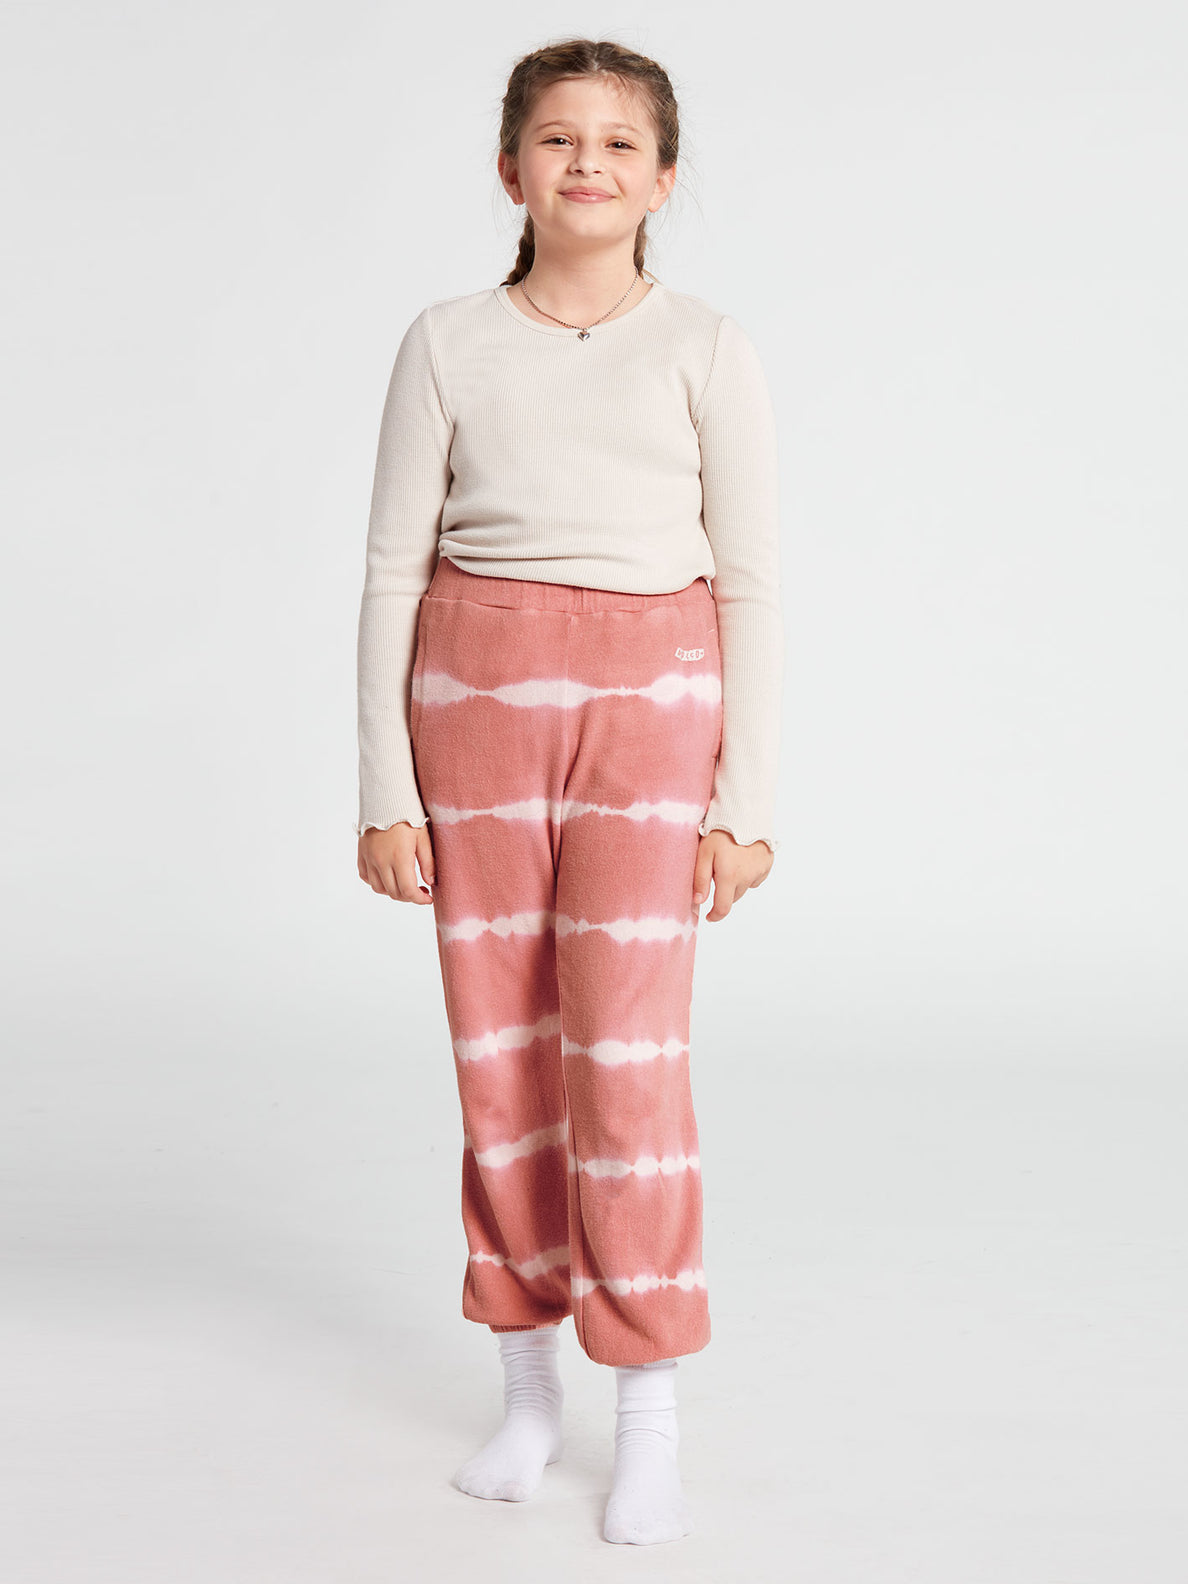 Girls Lived In Lounge Fleece Pant - Sepia